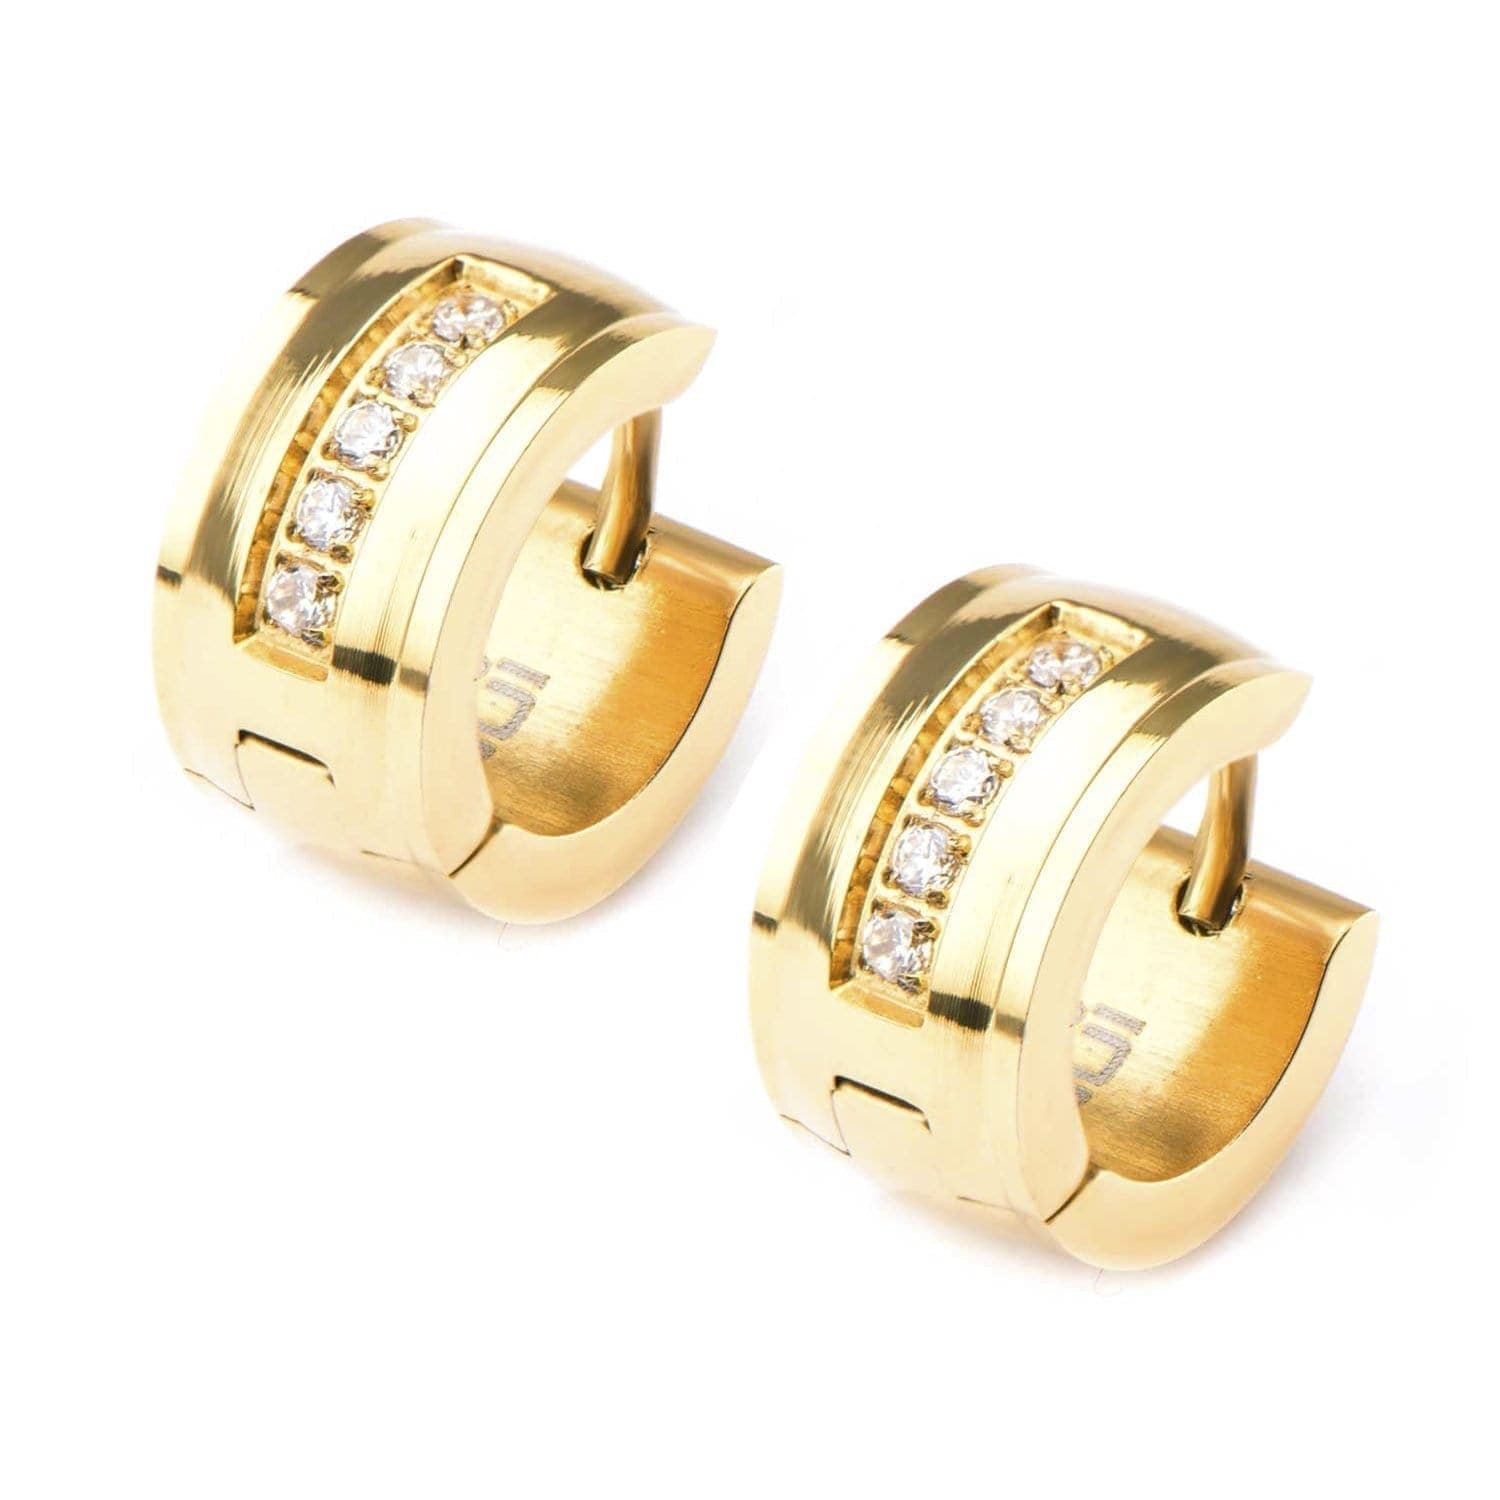 INOX JEWELRY Earrings Golden Tone Stainless Steel with CZ 7mm Bali SSE323176GLD